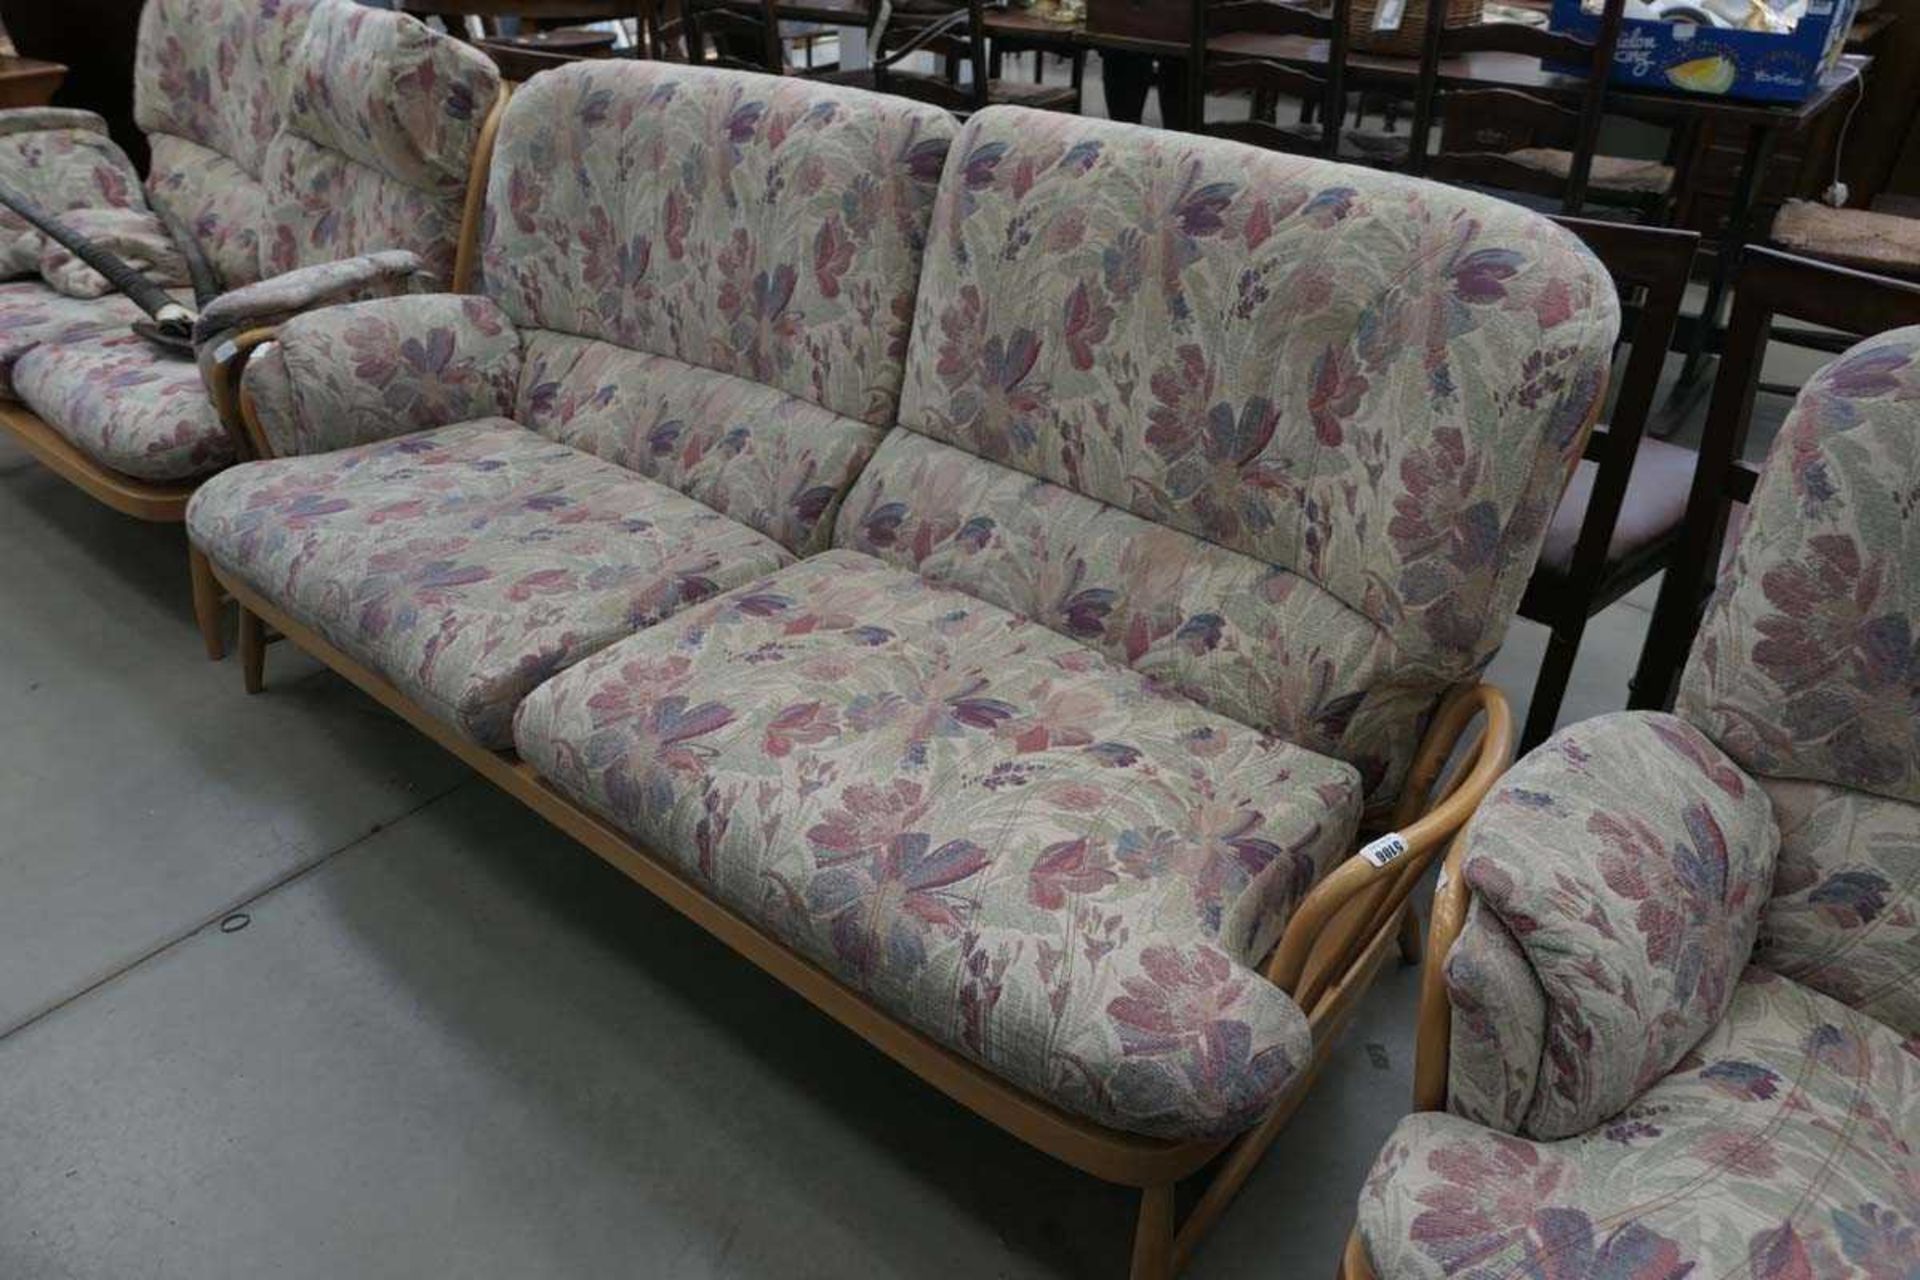 Ercol three seater stick back sofa plus a matching two seater and armchair - Image 2 of 3